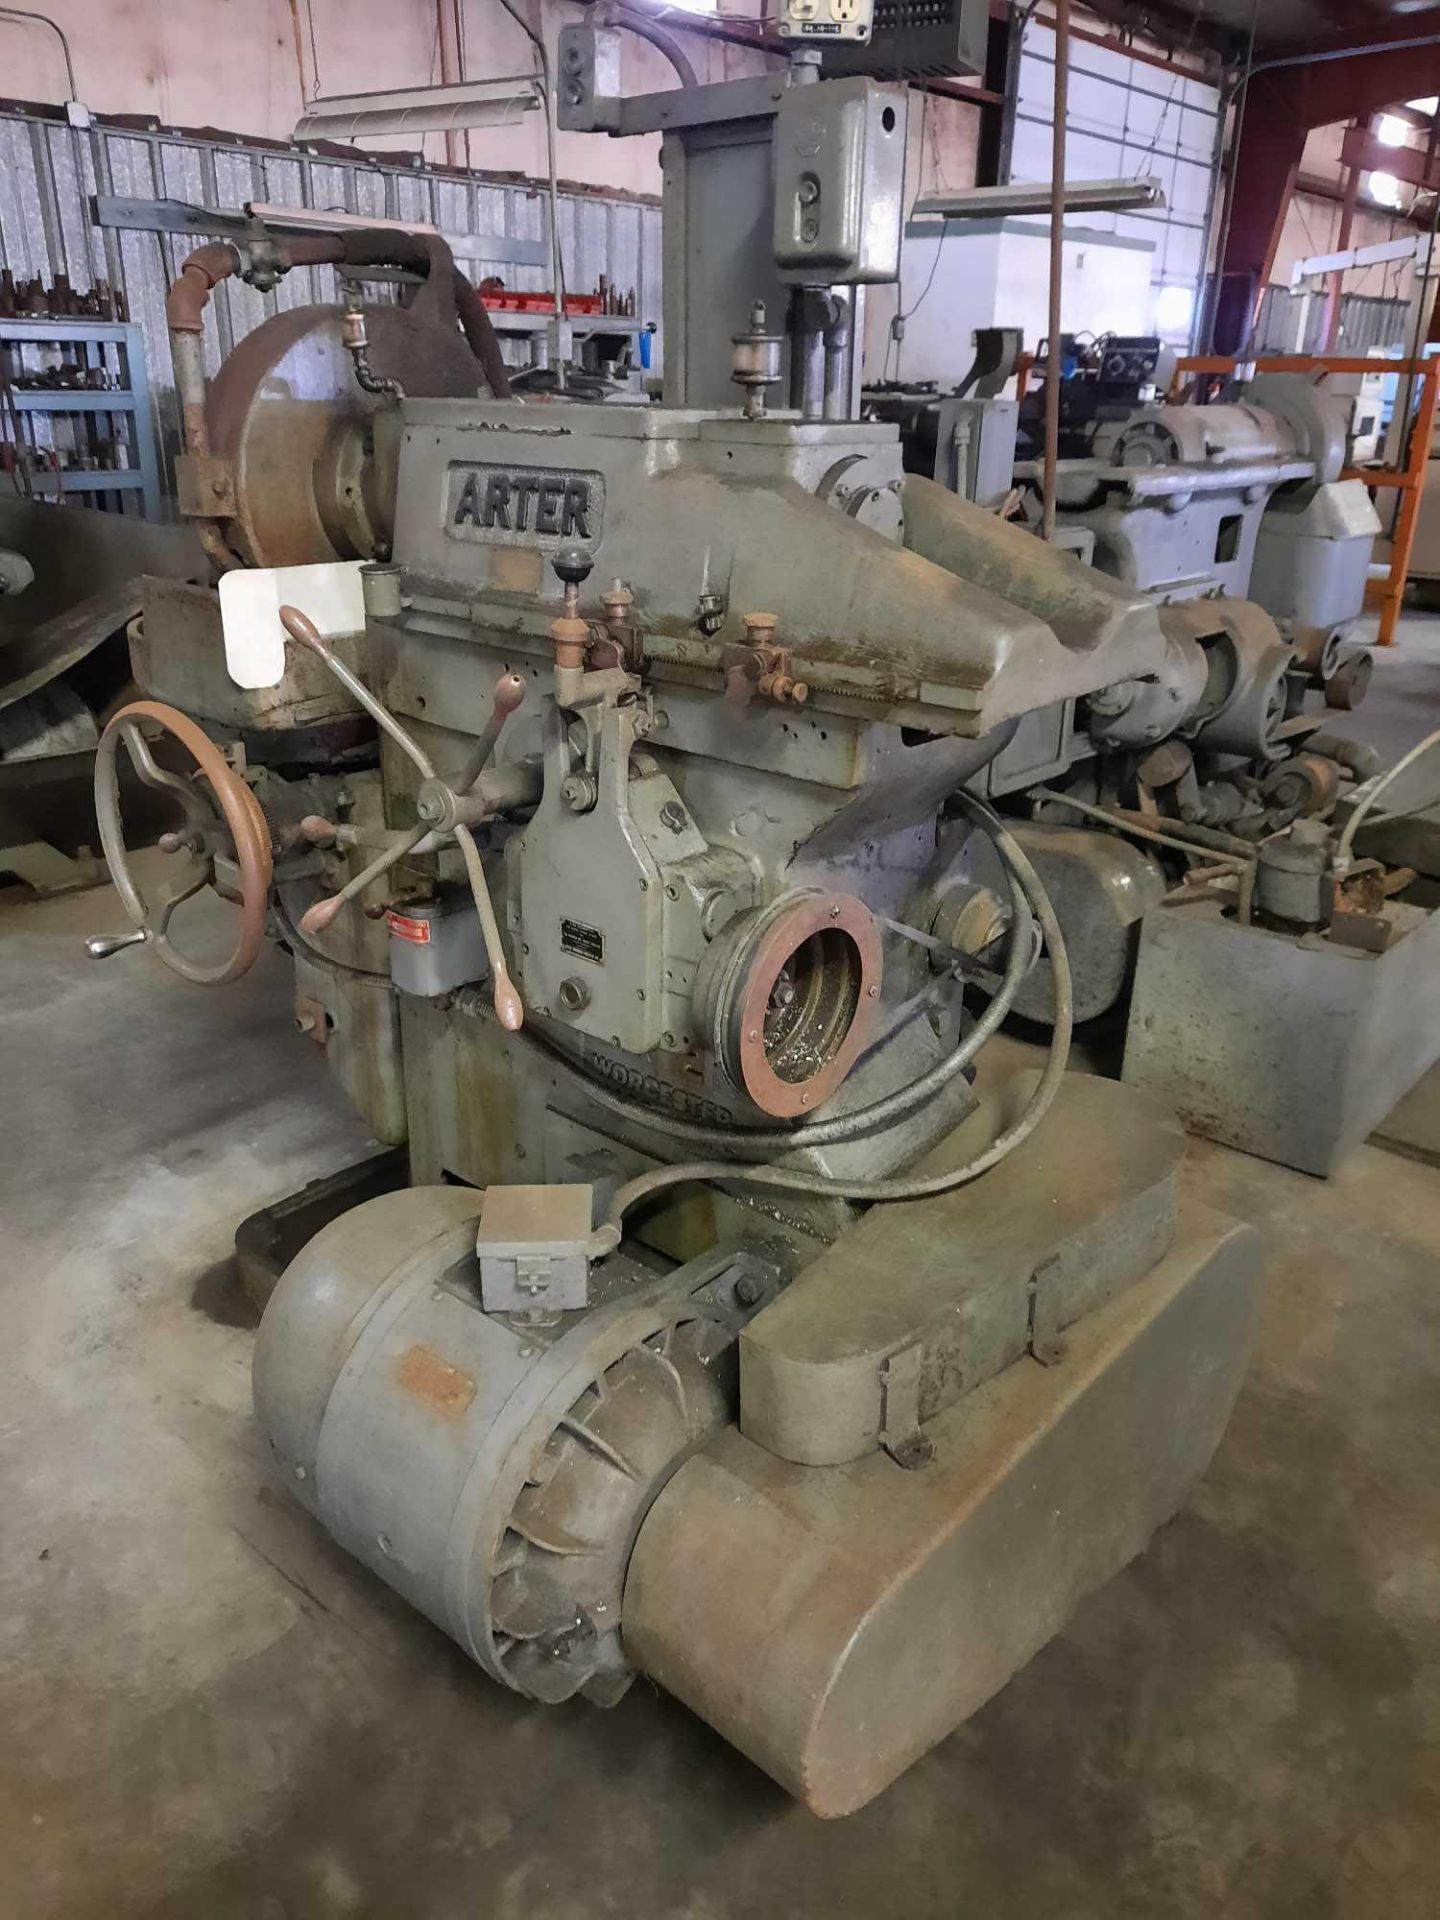 Arter rotary grinder, model A-1-12, serial 603, 14 inch chuck, overall dimensions 66 x 43 x 70 - Image 3 of 8